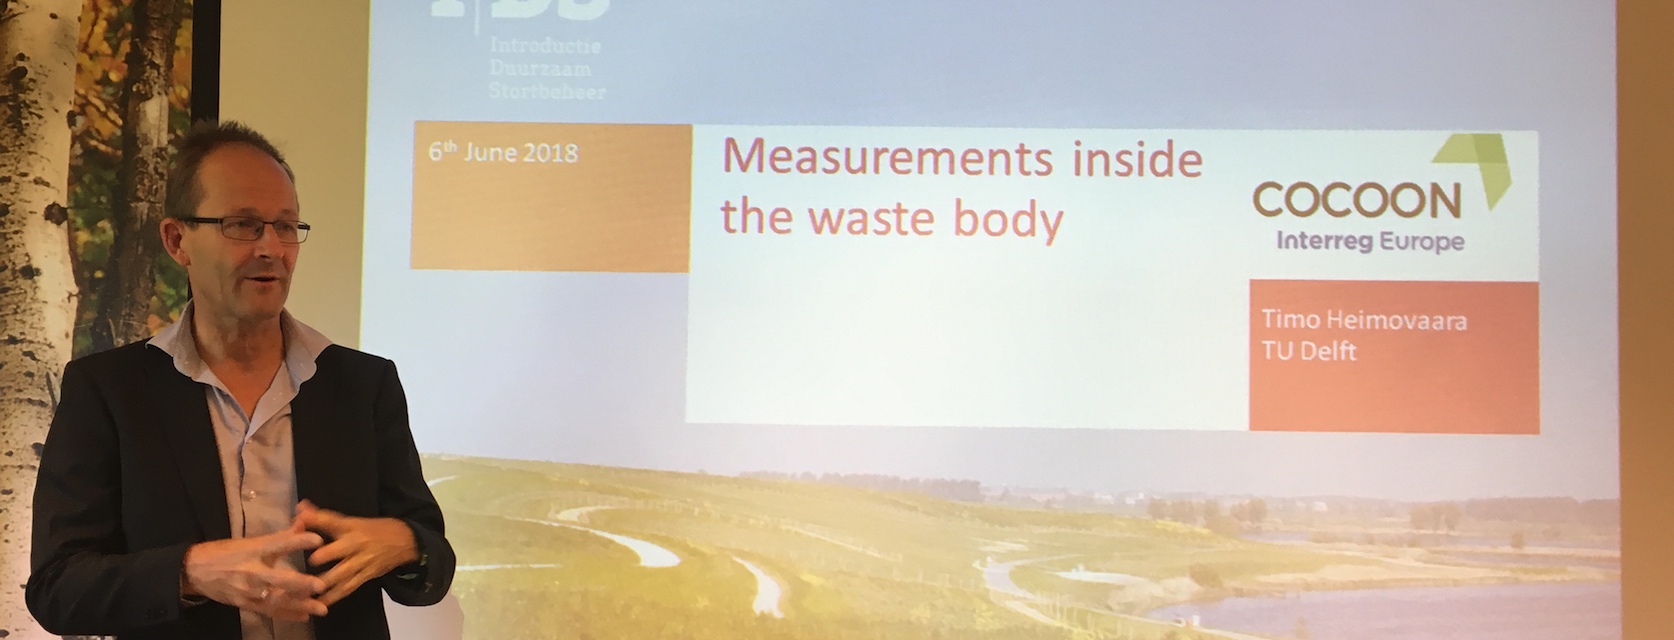 Measurements inside the waste body